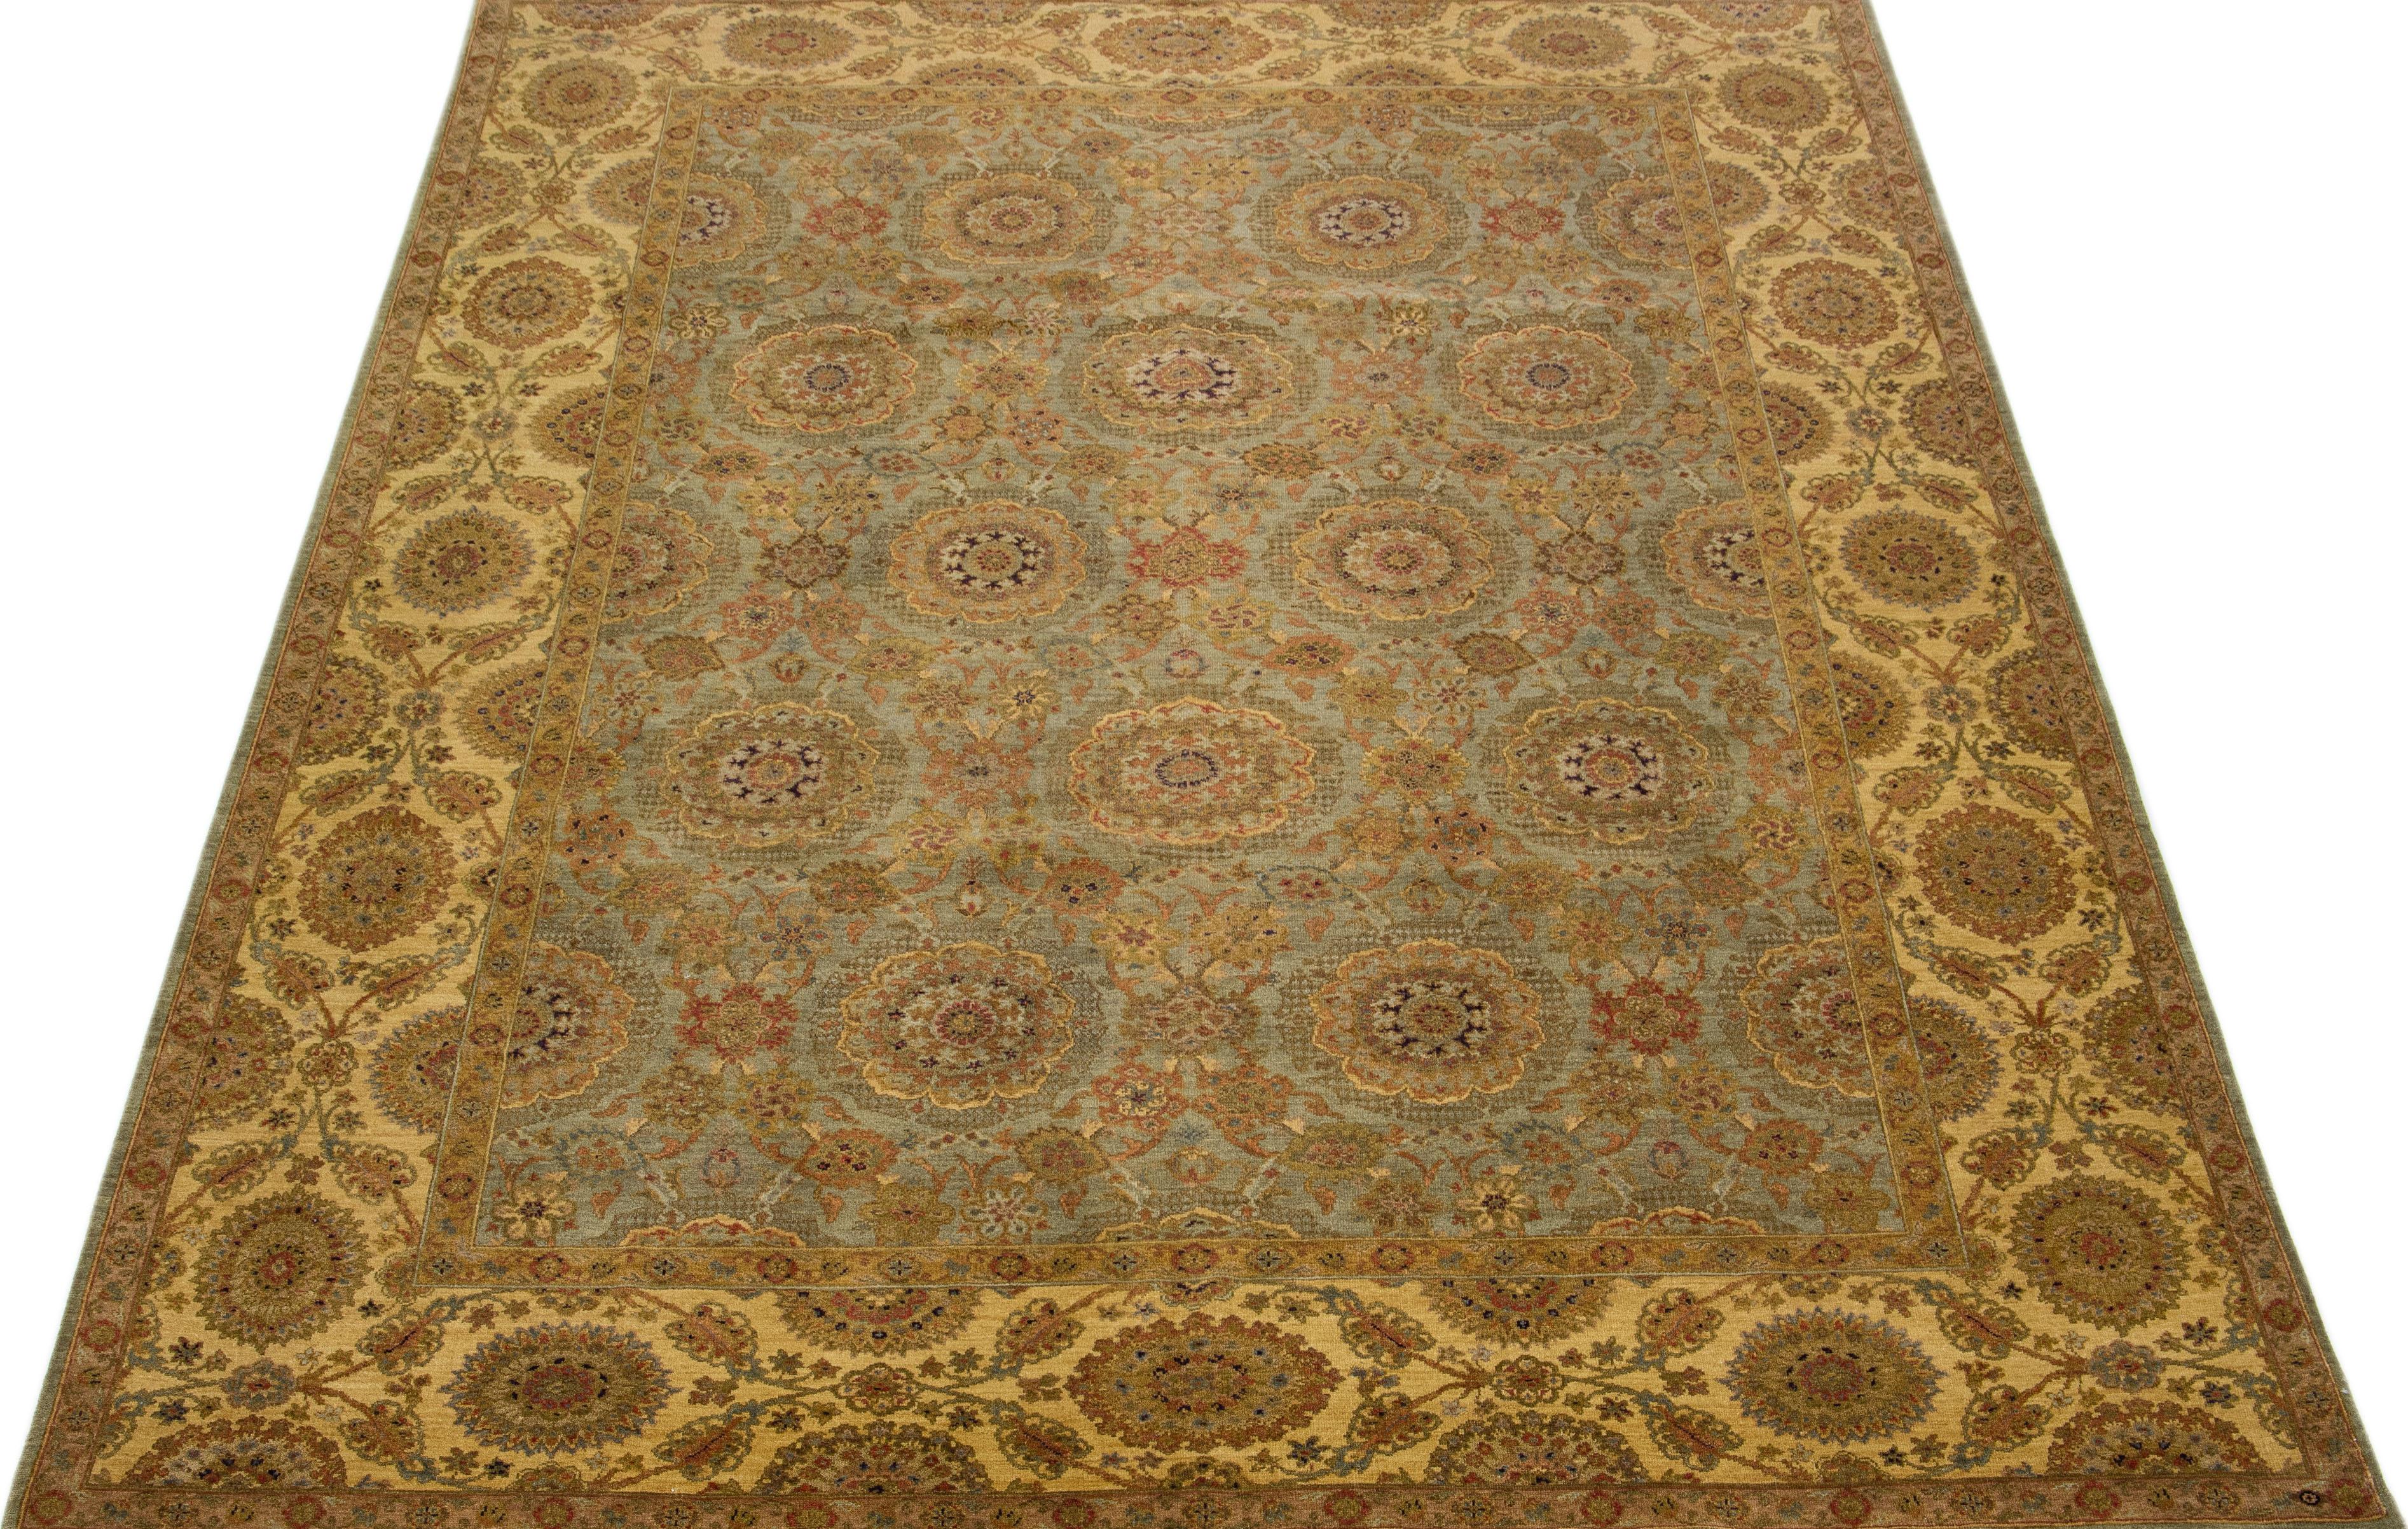 Beautiful antique Indian hand-knotted wool rug with a gray color field. This piece has a gorgeous allover floral design in beige, gray, and goldenrod colors.

This rug measures 9'1